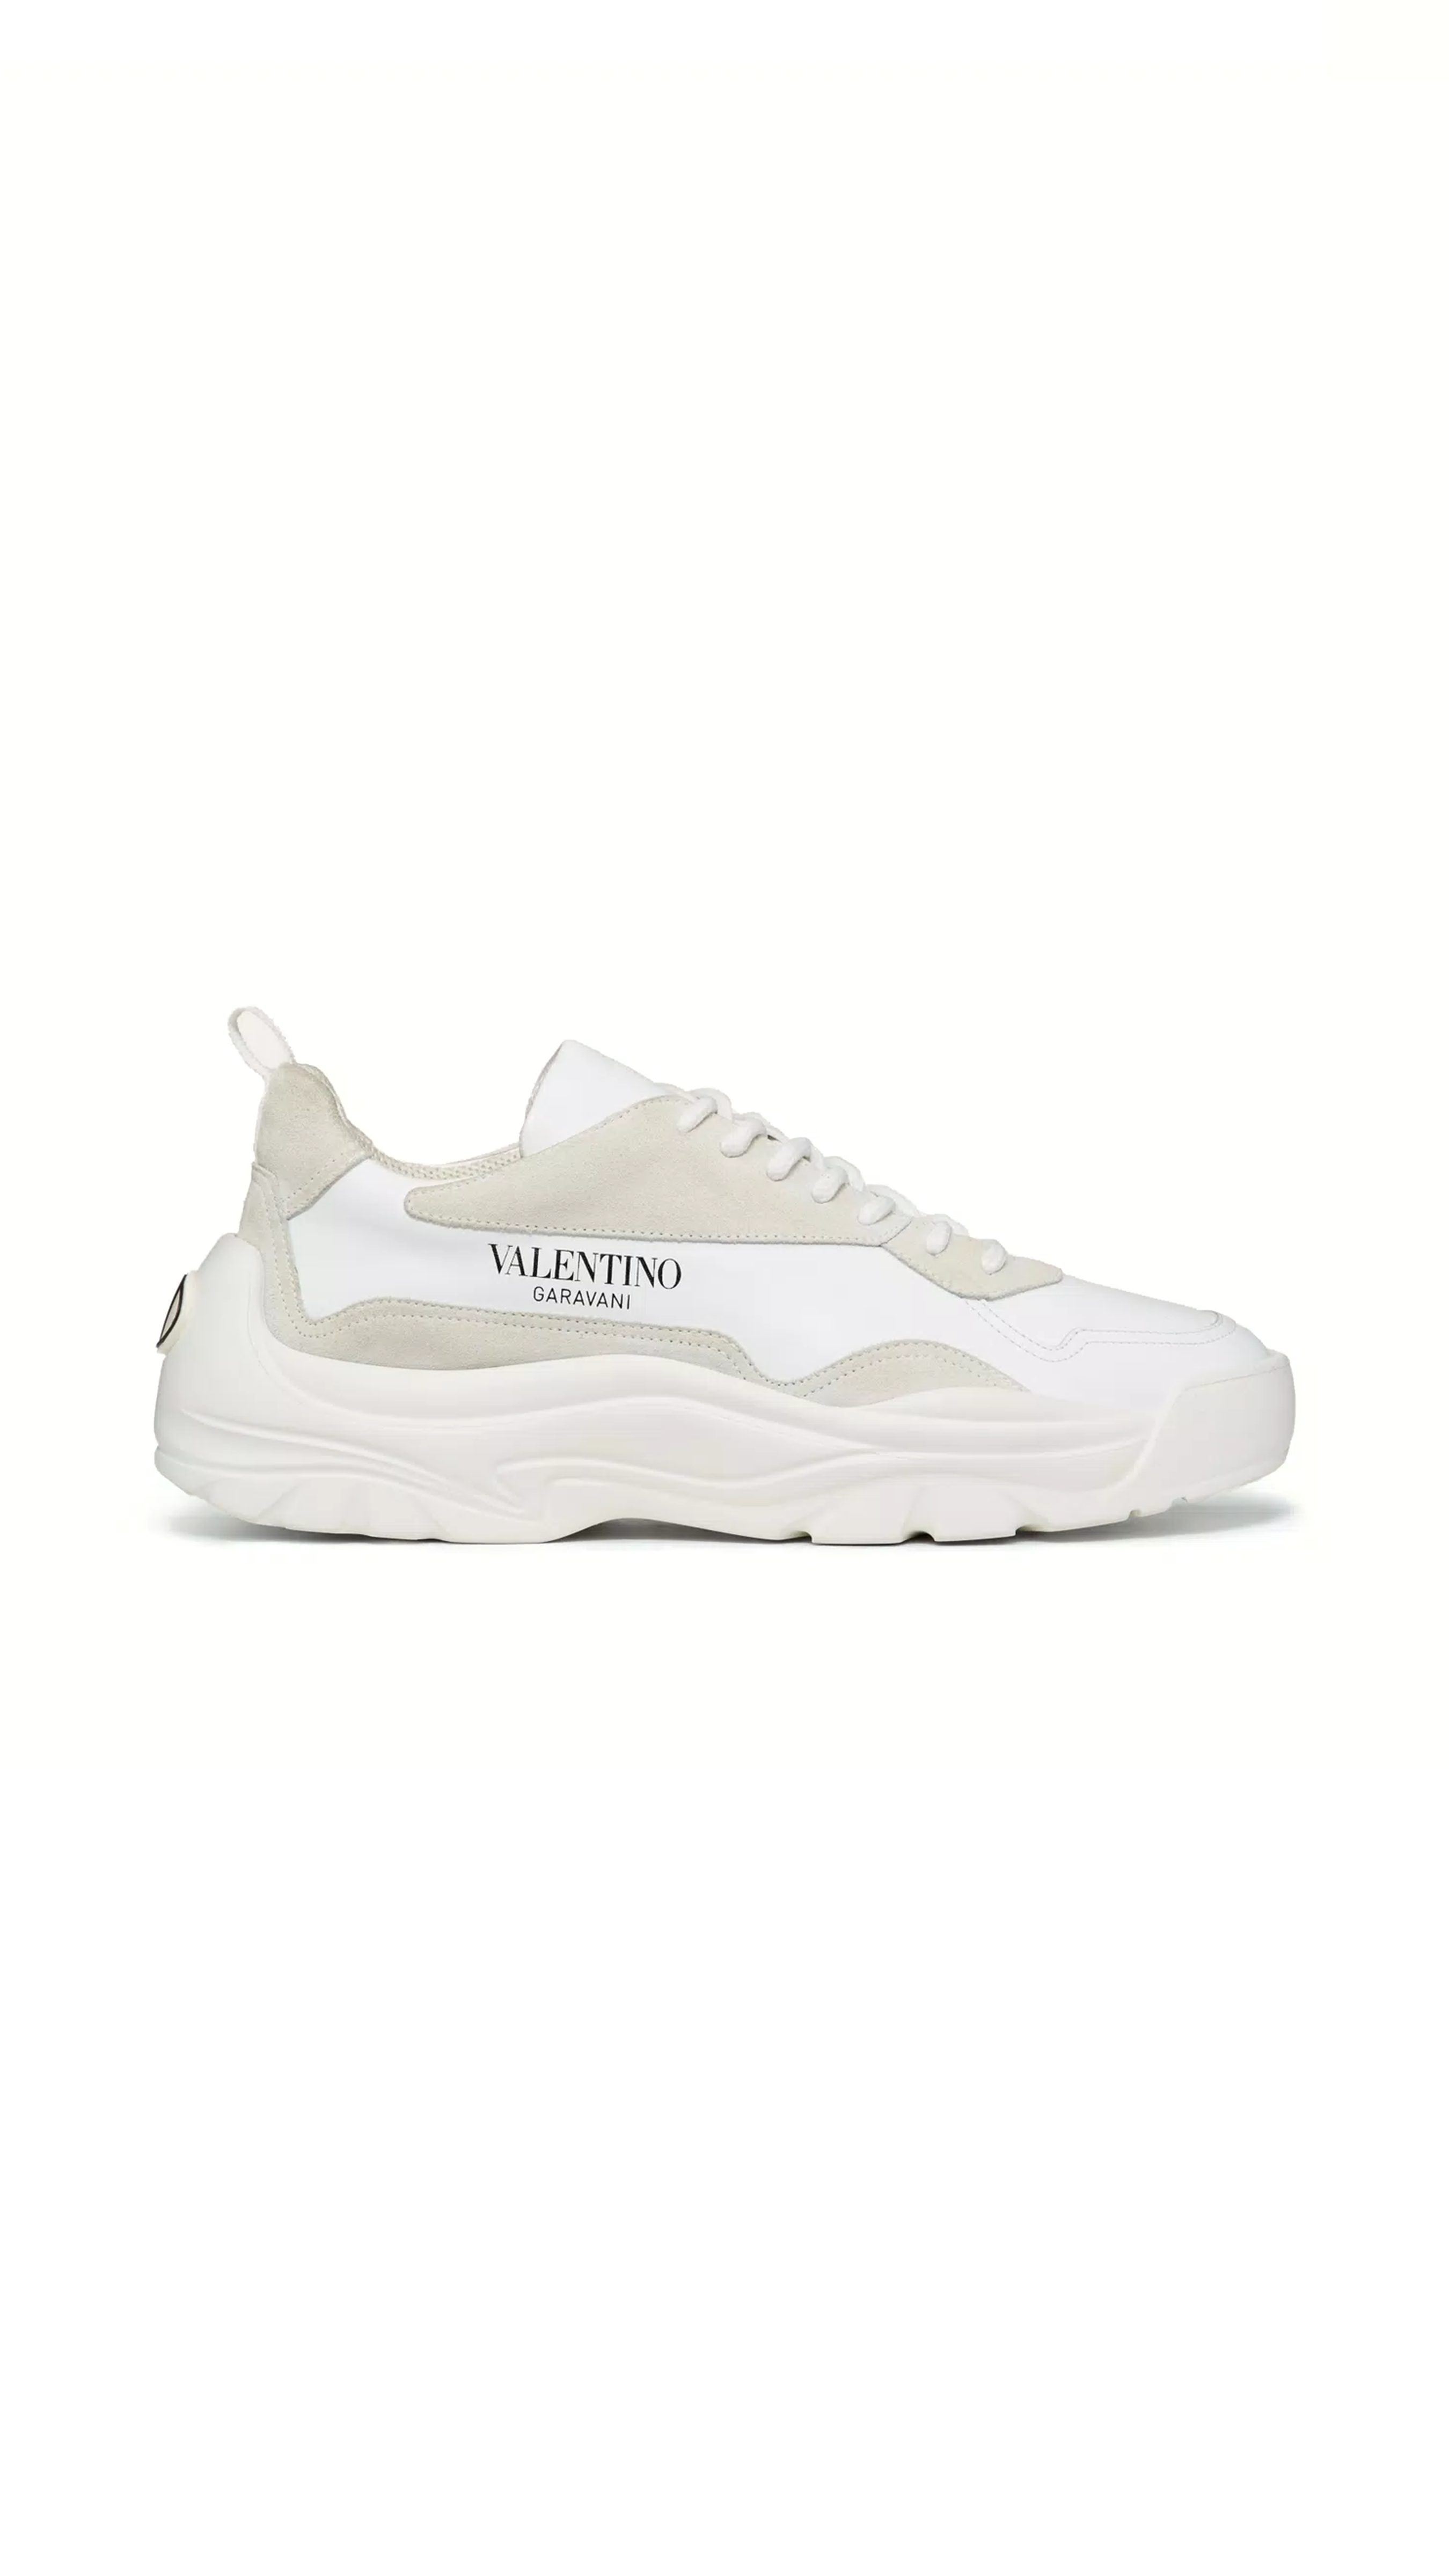 Gumboy Calfskin and Suede Sneakers - White